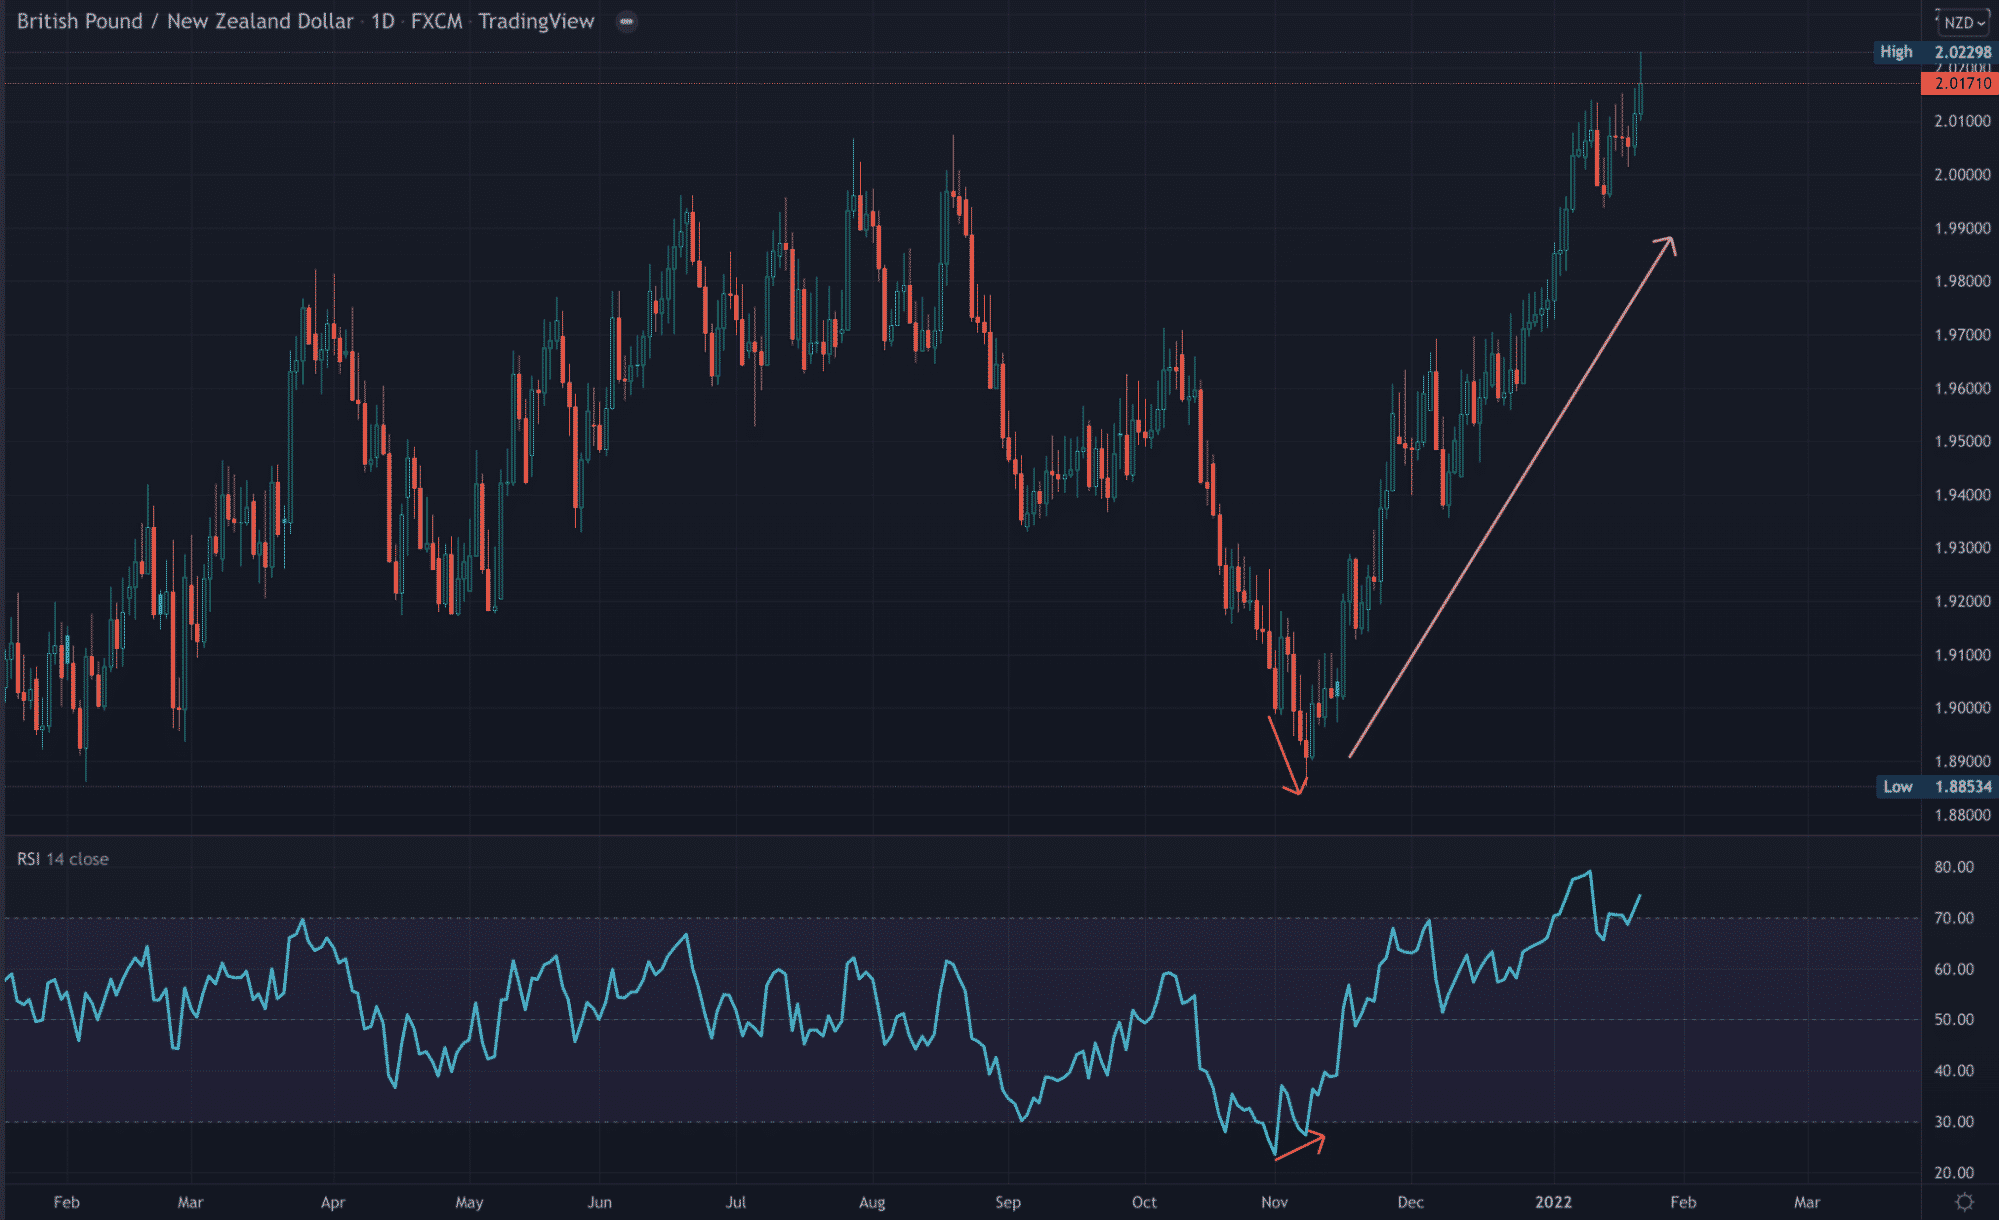 TradingView chart showing RSI divergence